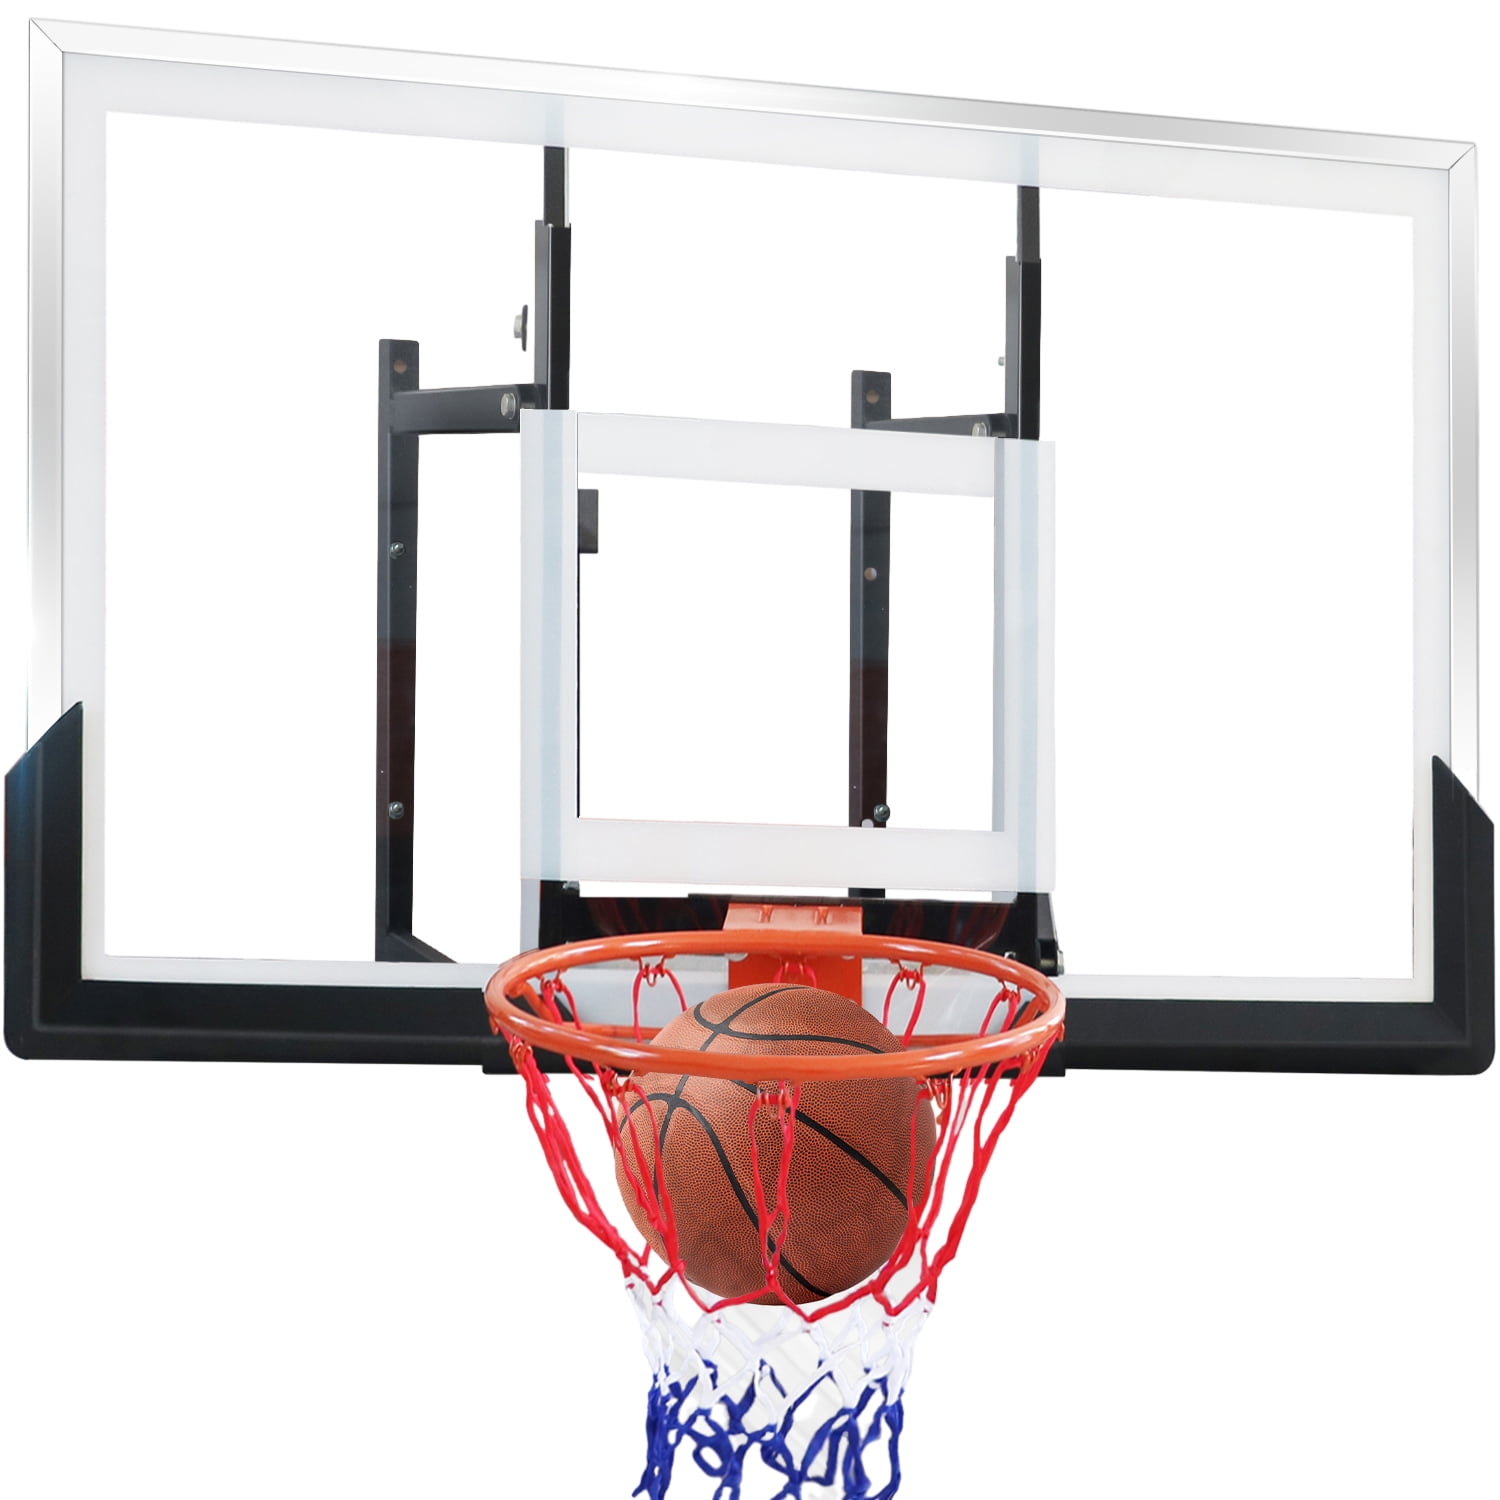 Set Summer Waves for Hoop Inflatable Pools, Frame White, for Rim, Adults, and Unisex Basketball Backboard Basketball Basketball included, with